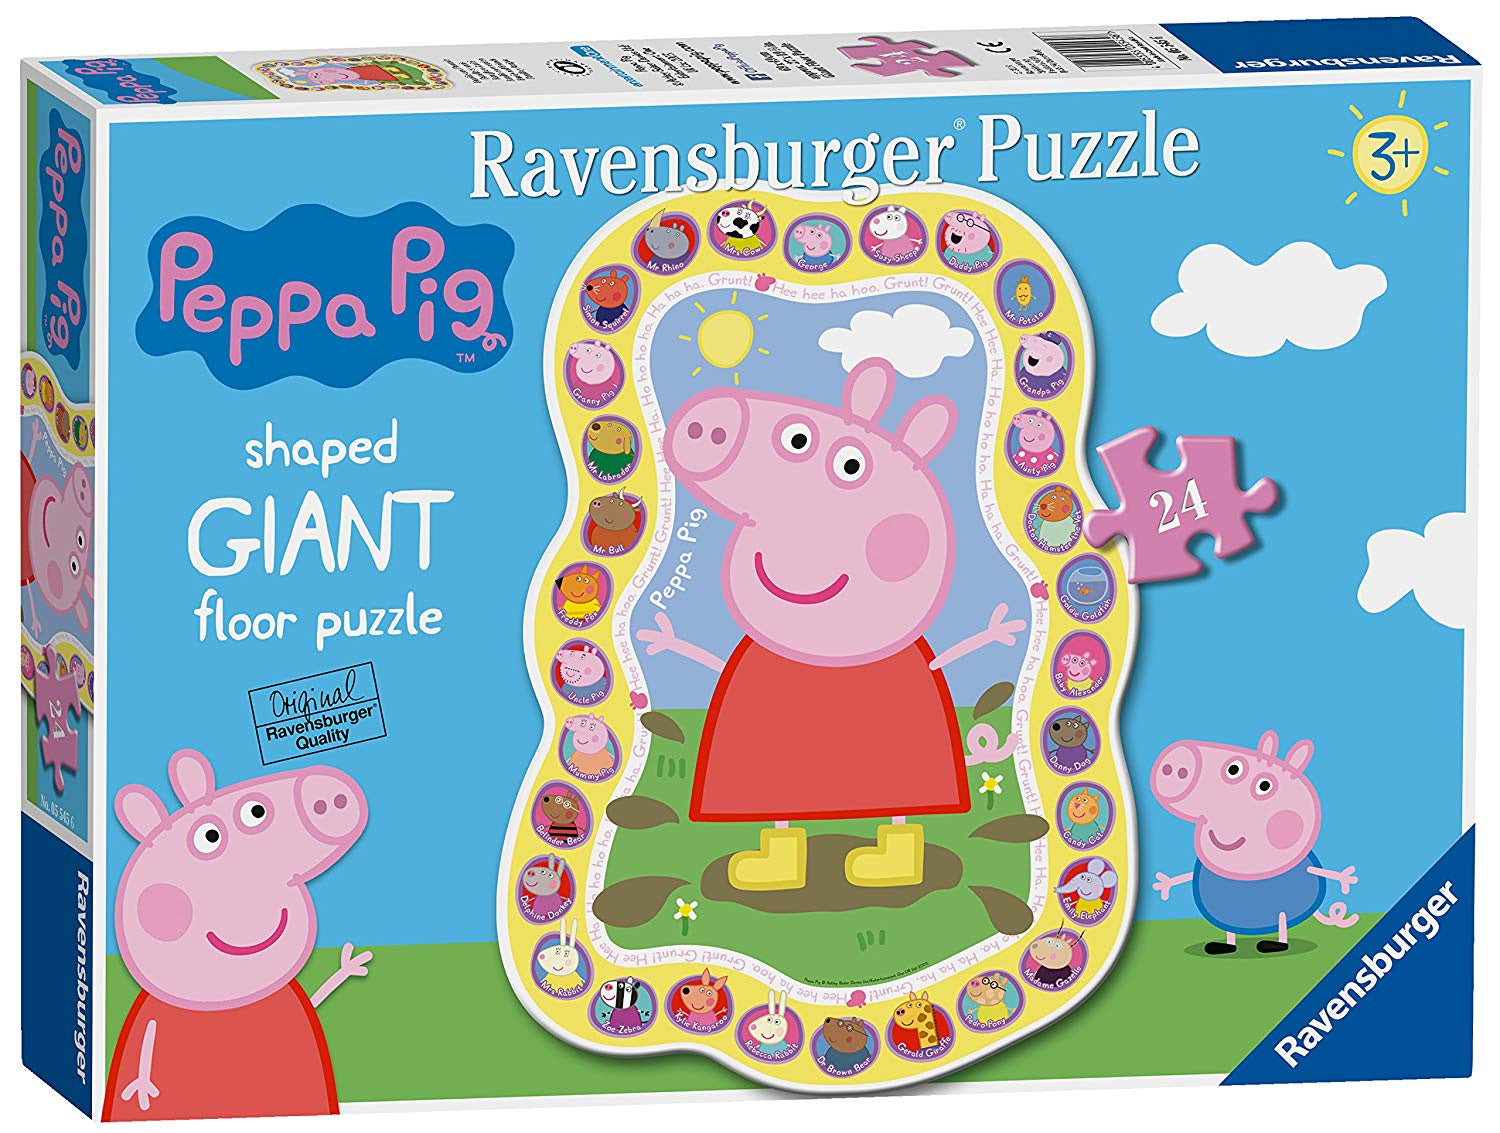 Peppa Pig Shaped Giant Floor Puzzle